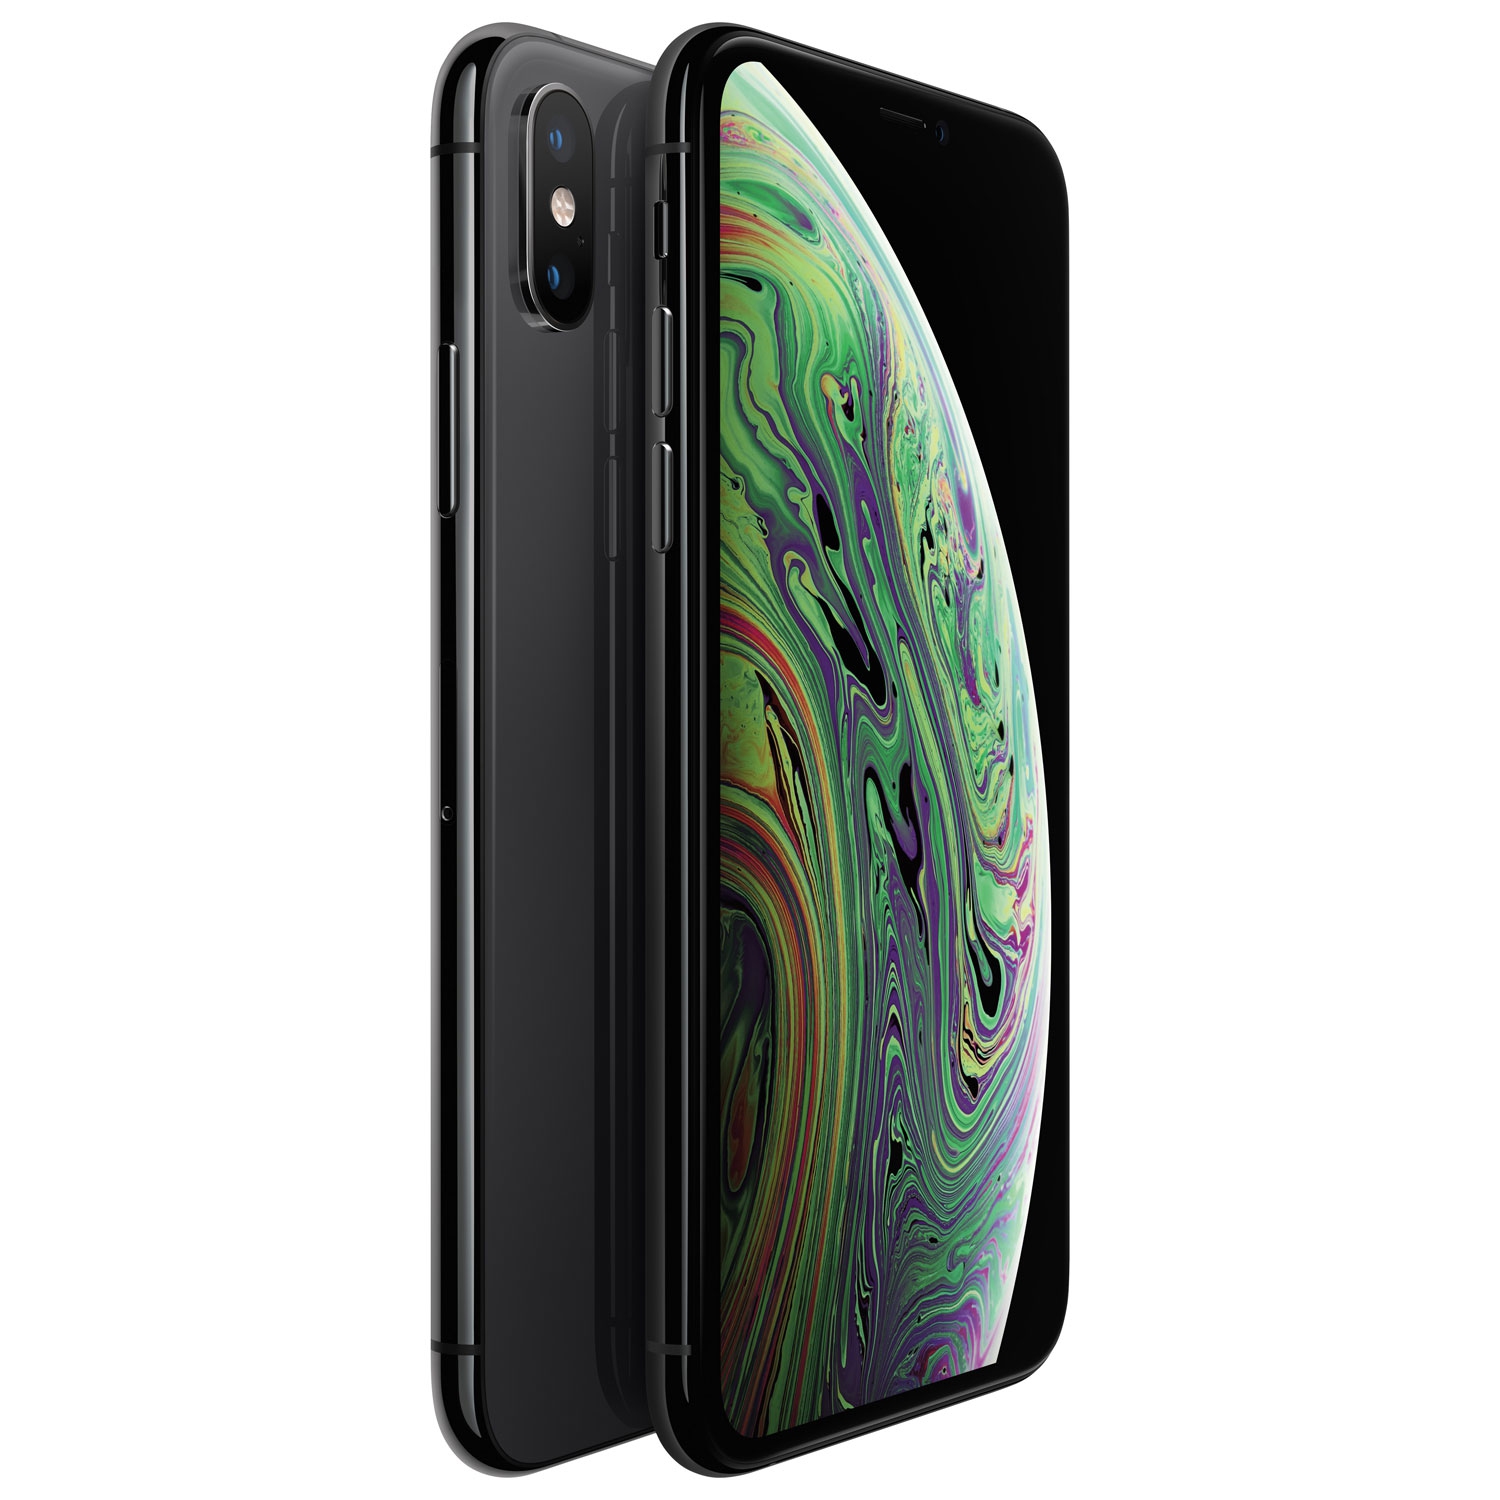 Refurbished (Excellent) - Apple iPhone XS Max 512GB Smartphone - Space Grey - Unlocked - Certified Refurbished